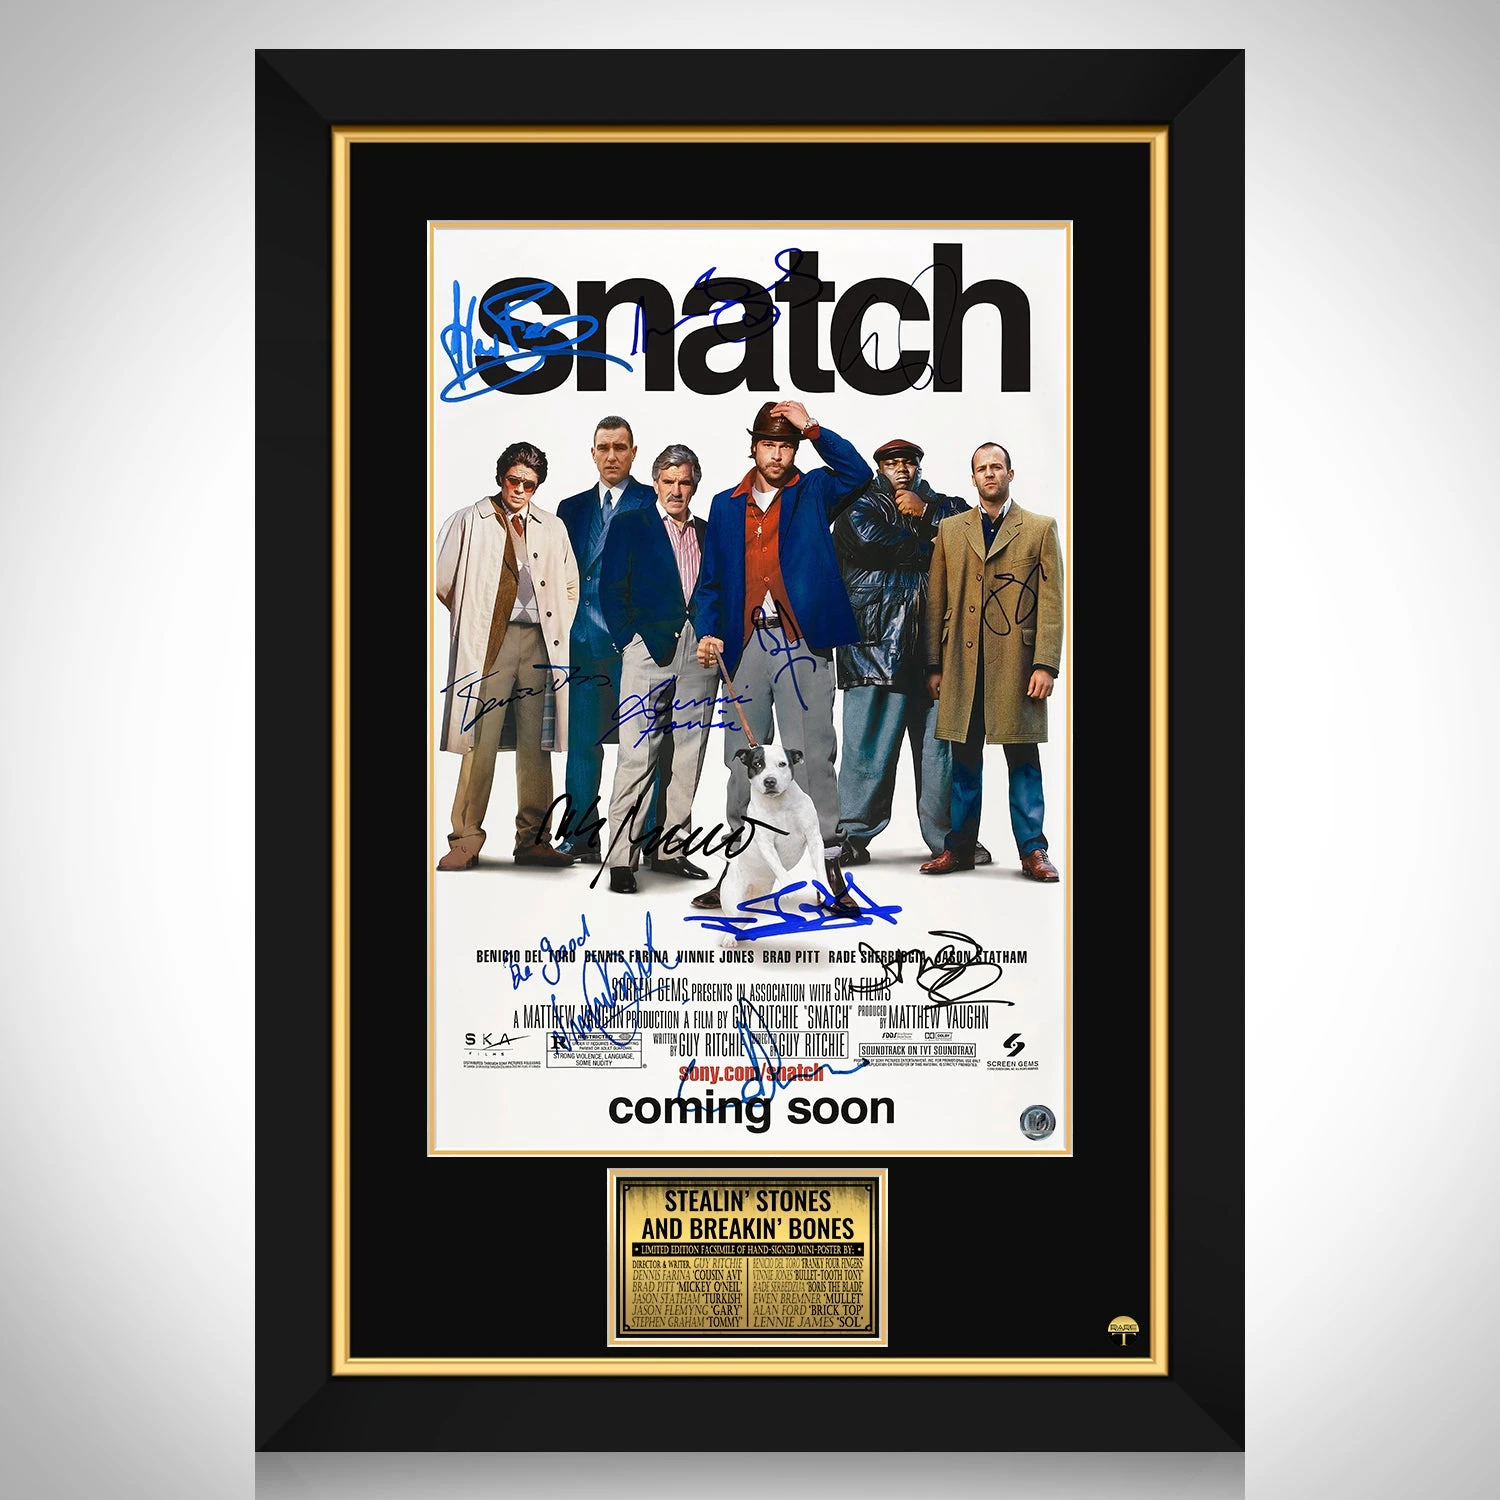 Snatch Mini Poster Limited Signature Edition Custom Frame - $309.73